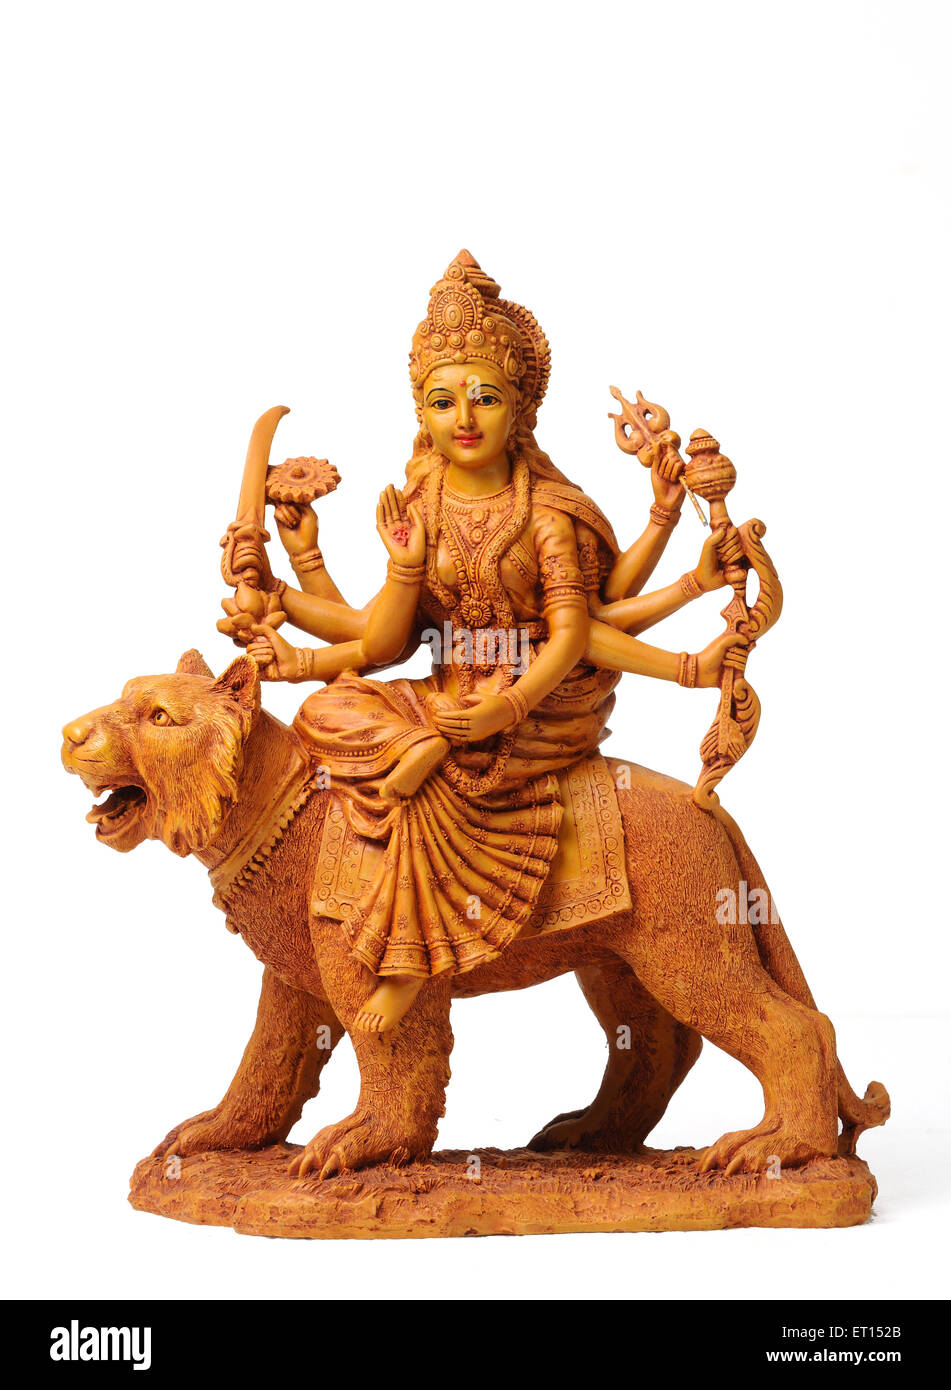 Maa durga Cut Out Stock Images & Pictures - Alamy